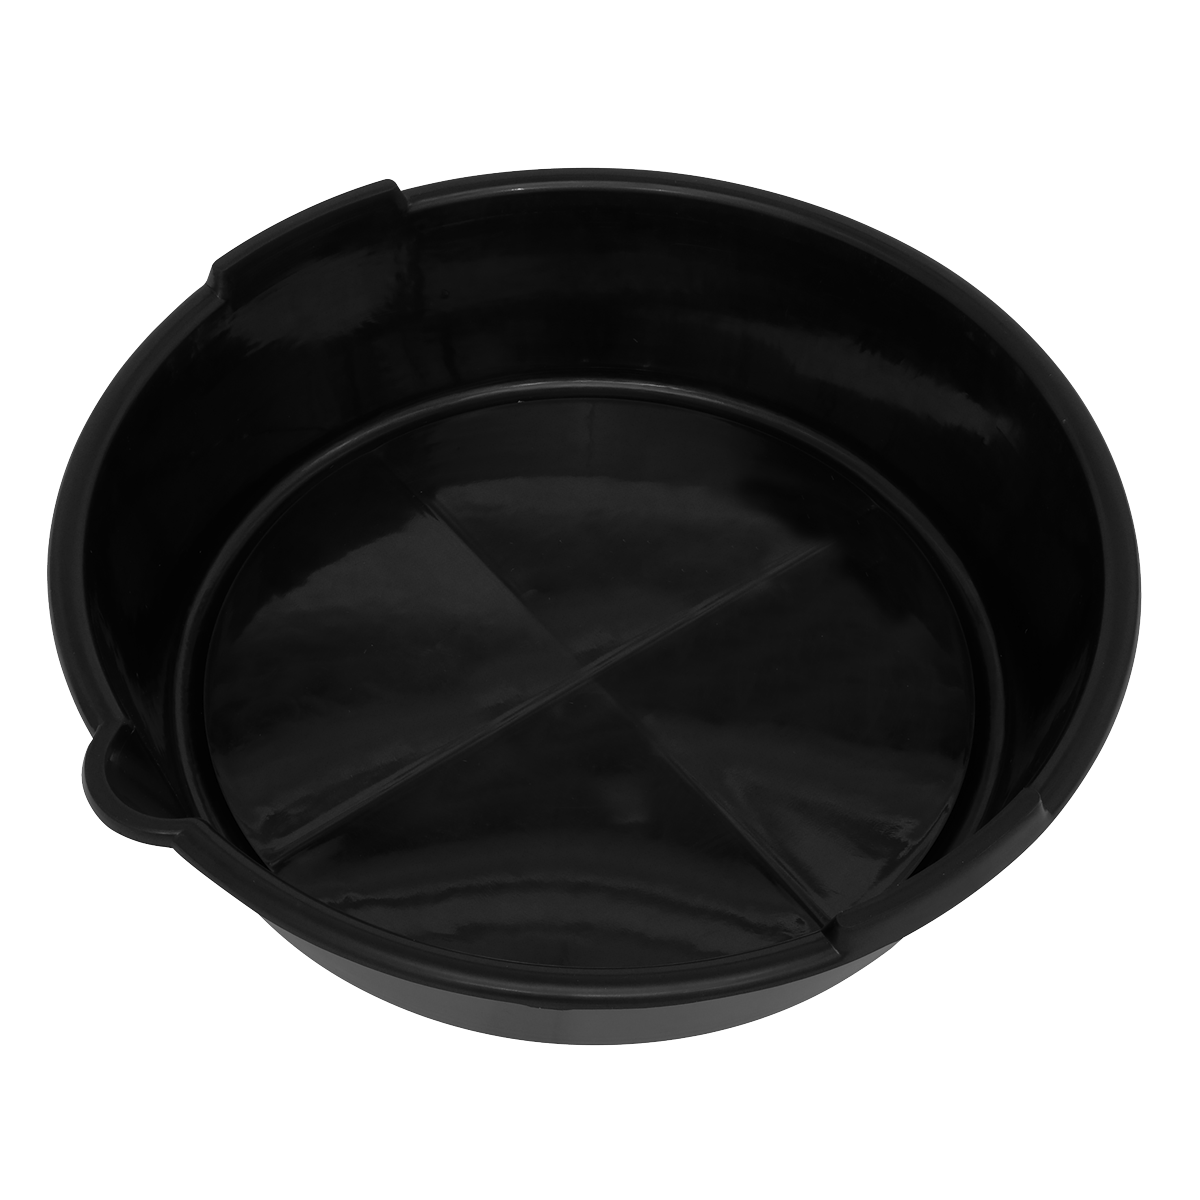 Sealey Oil/Fluid Drain Pan 6L DRP14 | Suitable for both the DIY user and professional mechanic. | toolforce.ie